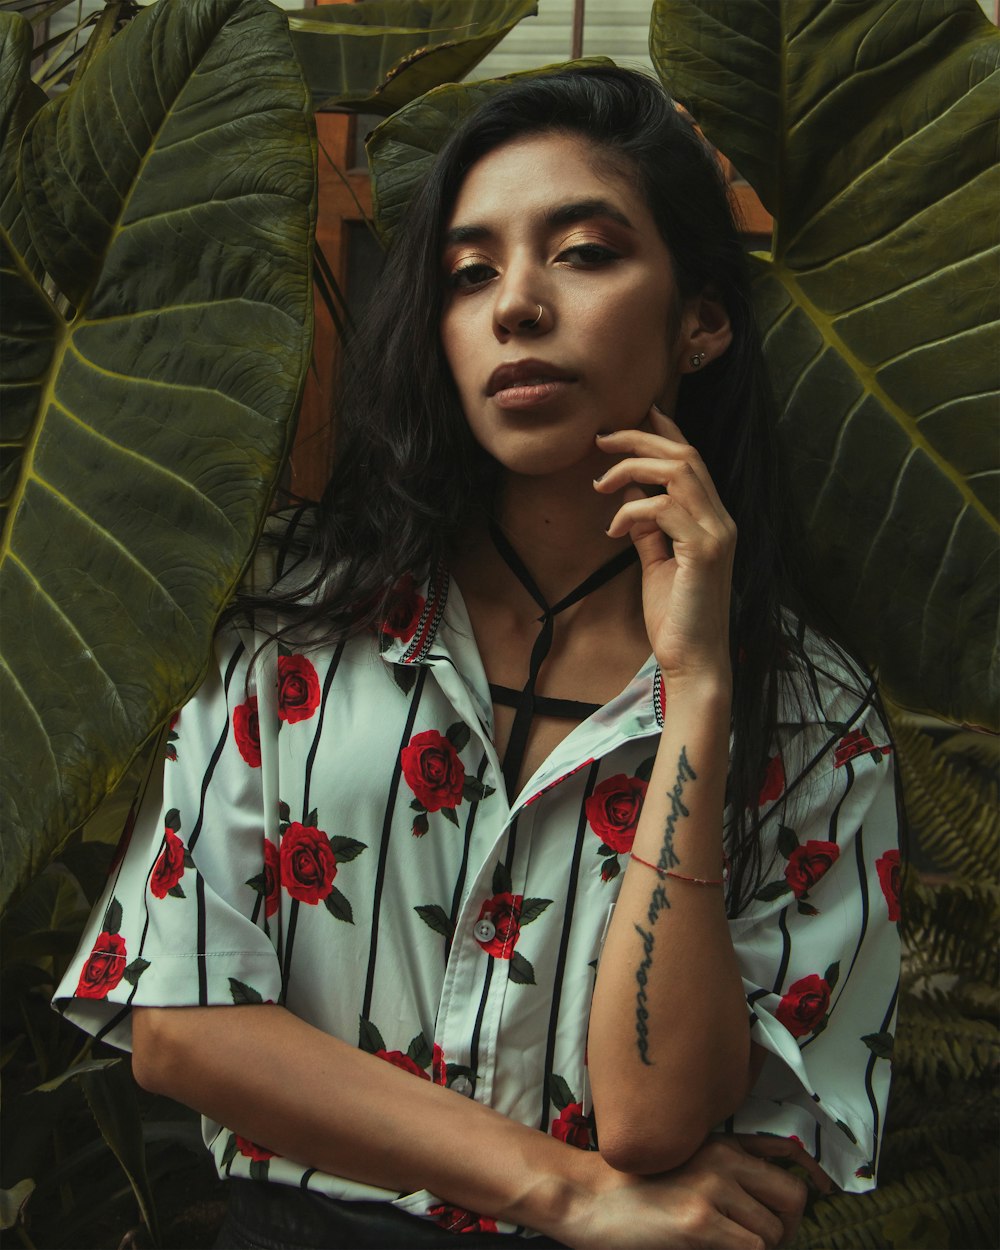 a woman with a tattoo on her arm standing in front of a plant